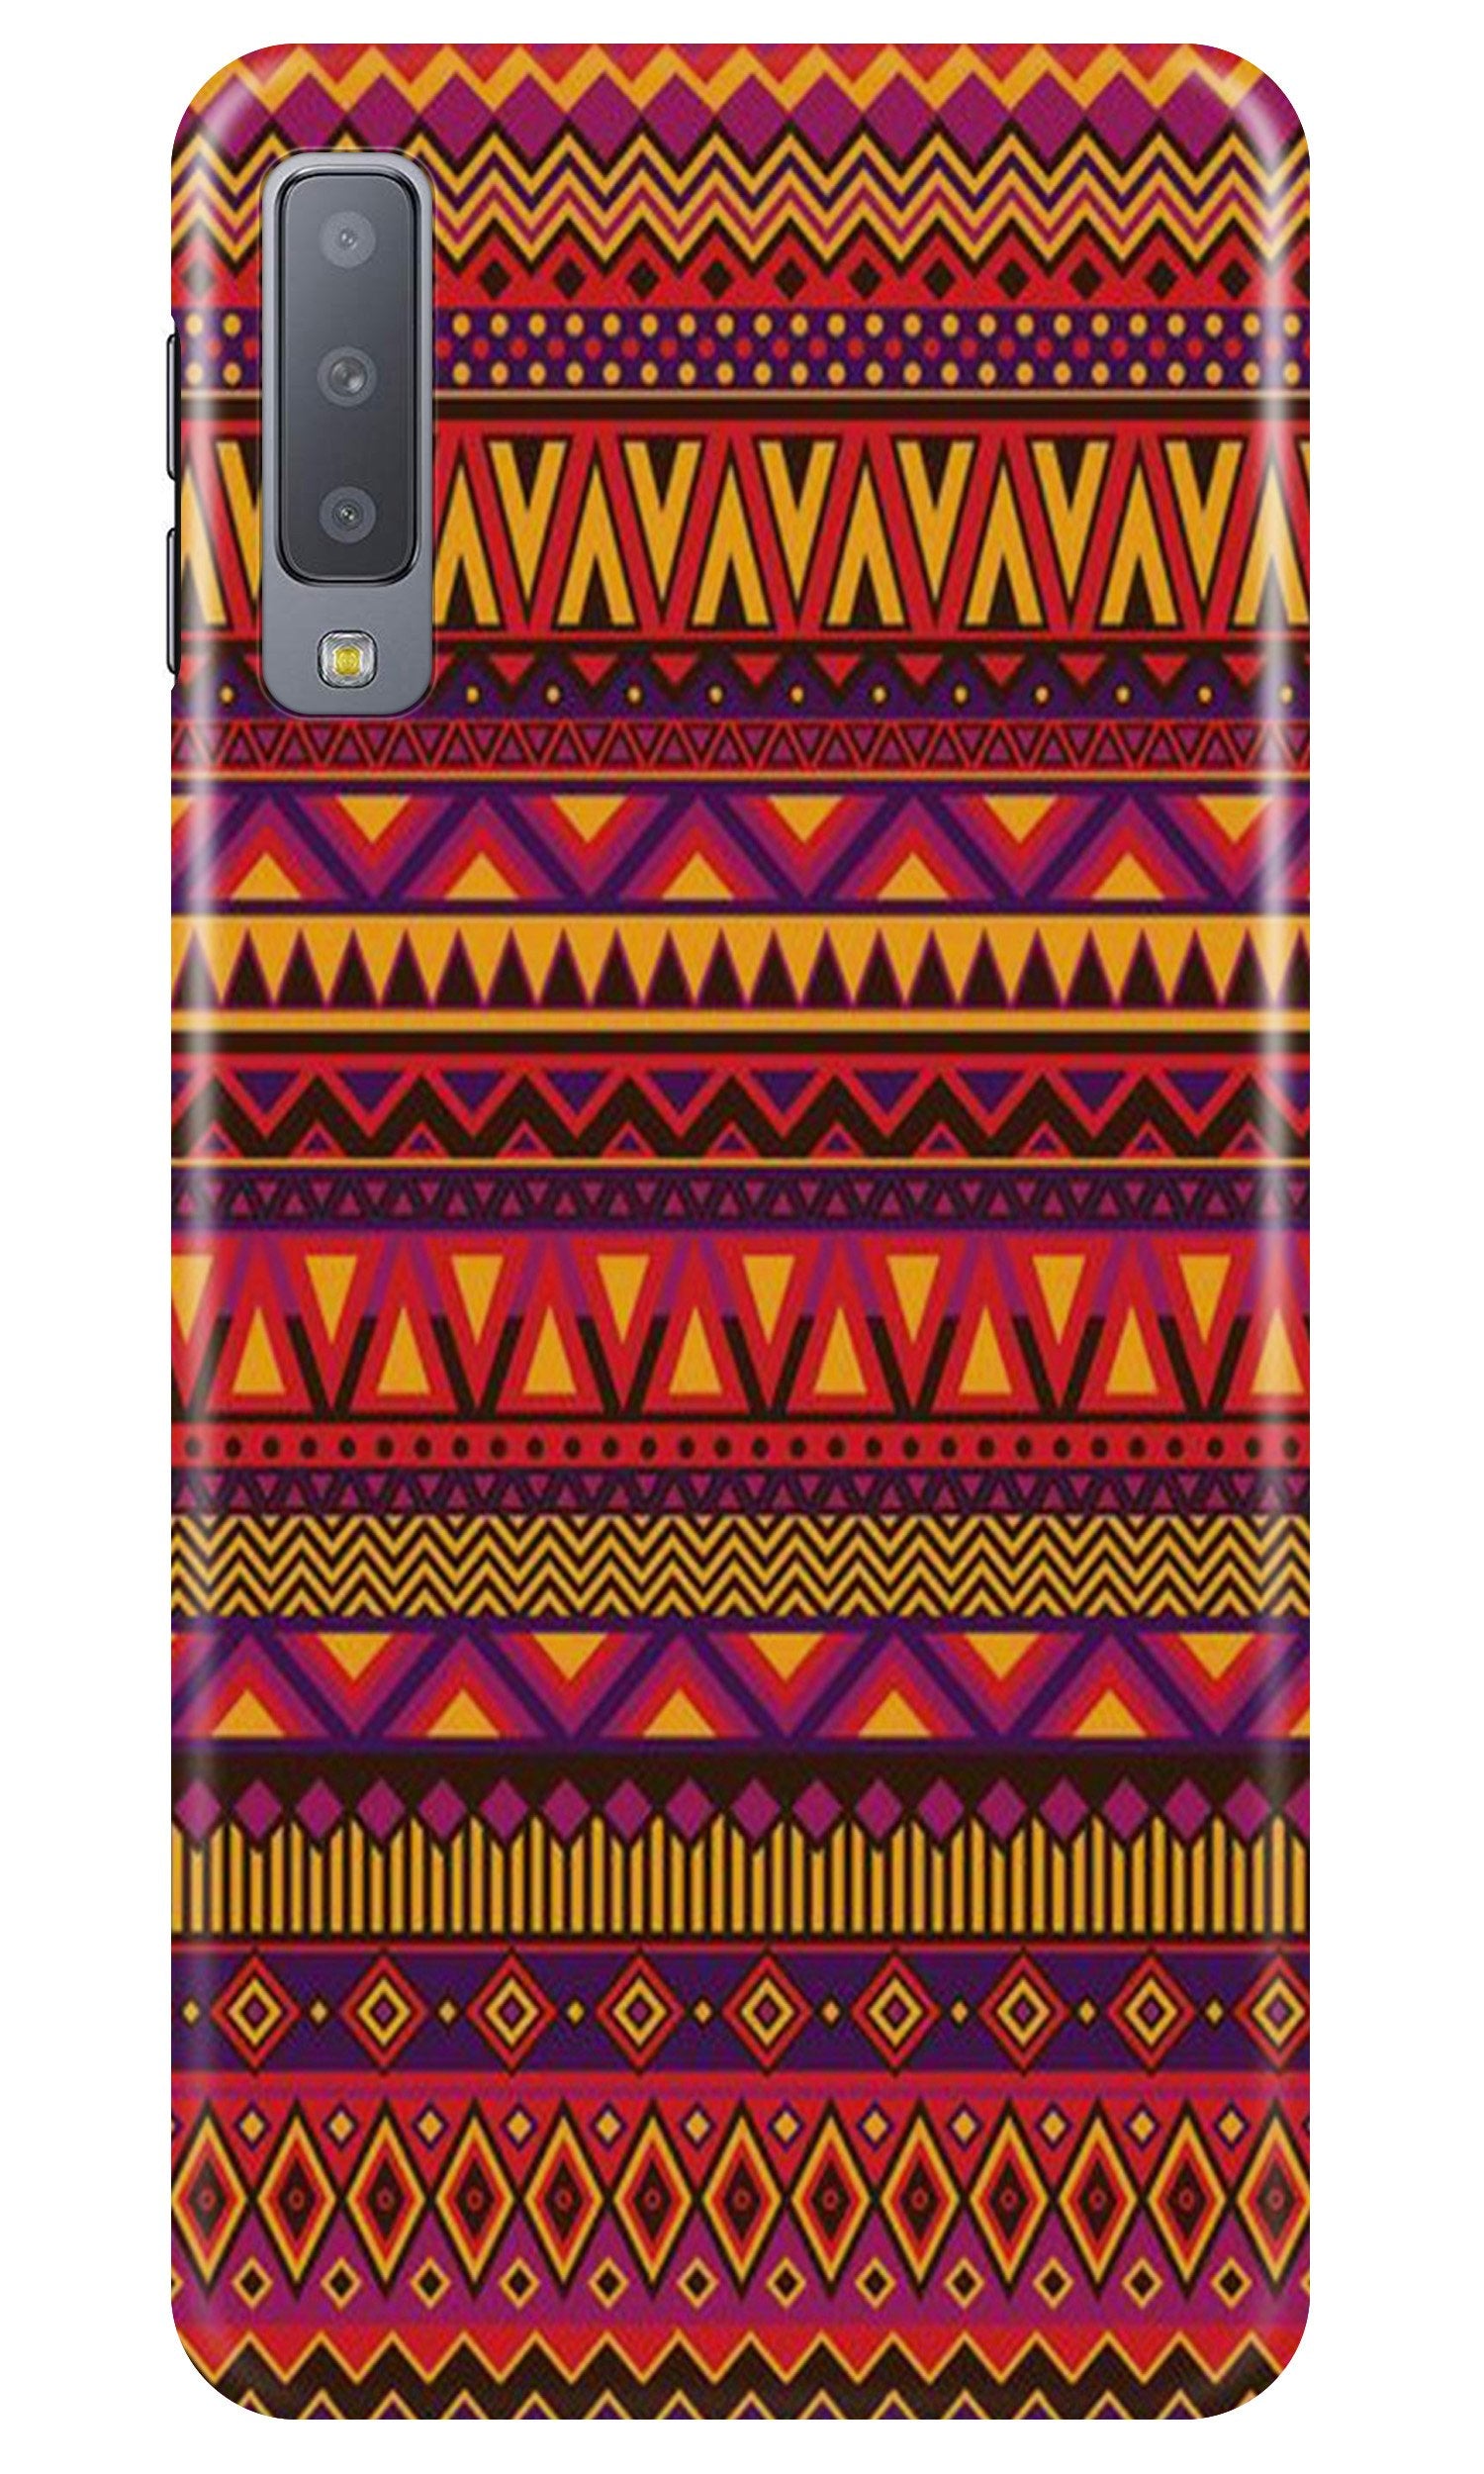 Zigzag line pattern2 Case for Samsung Galaxy A30s